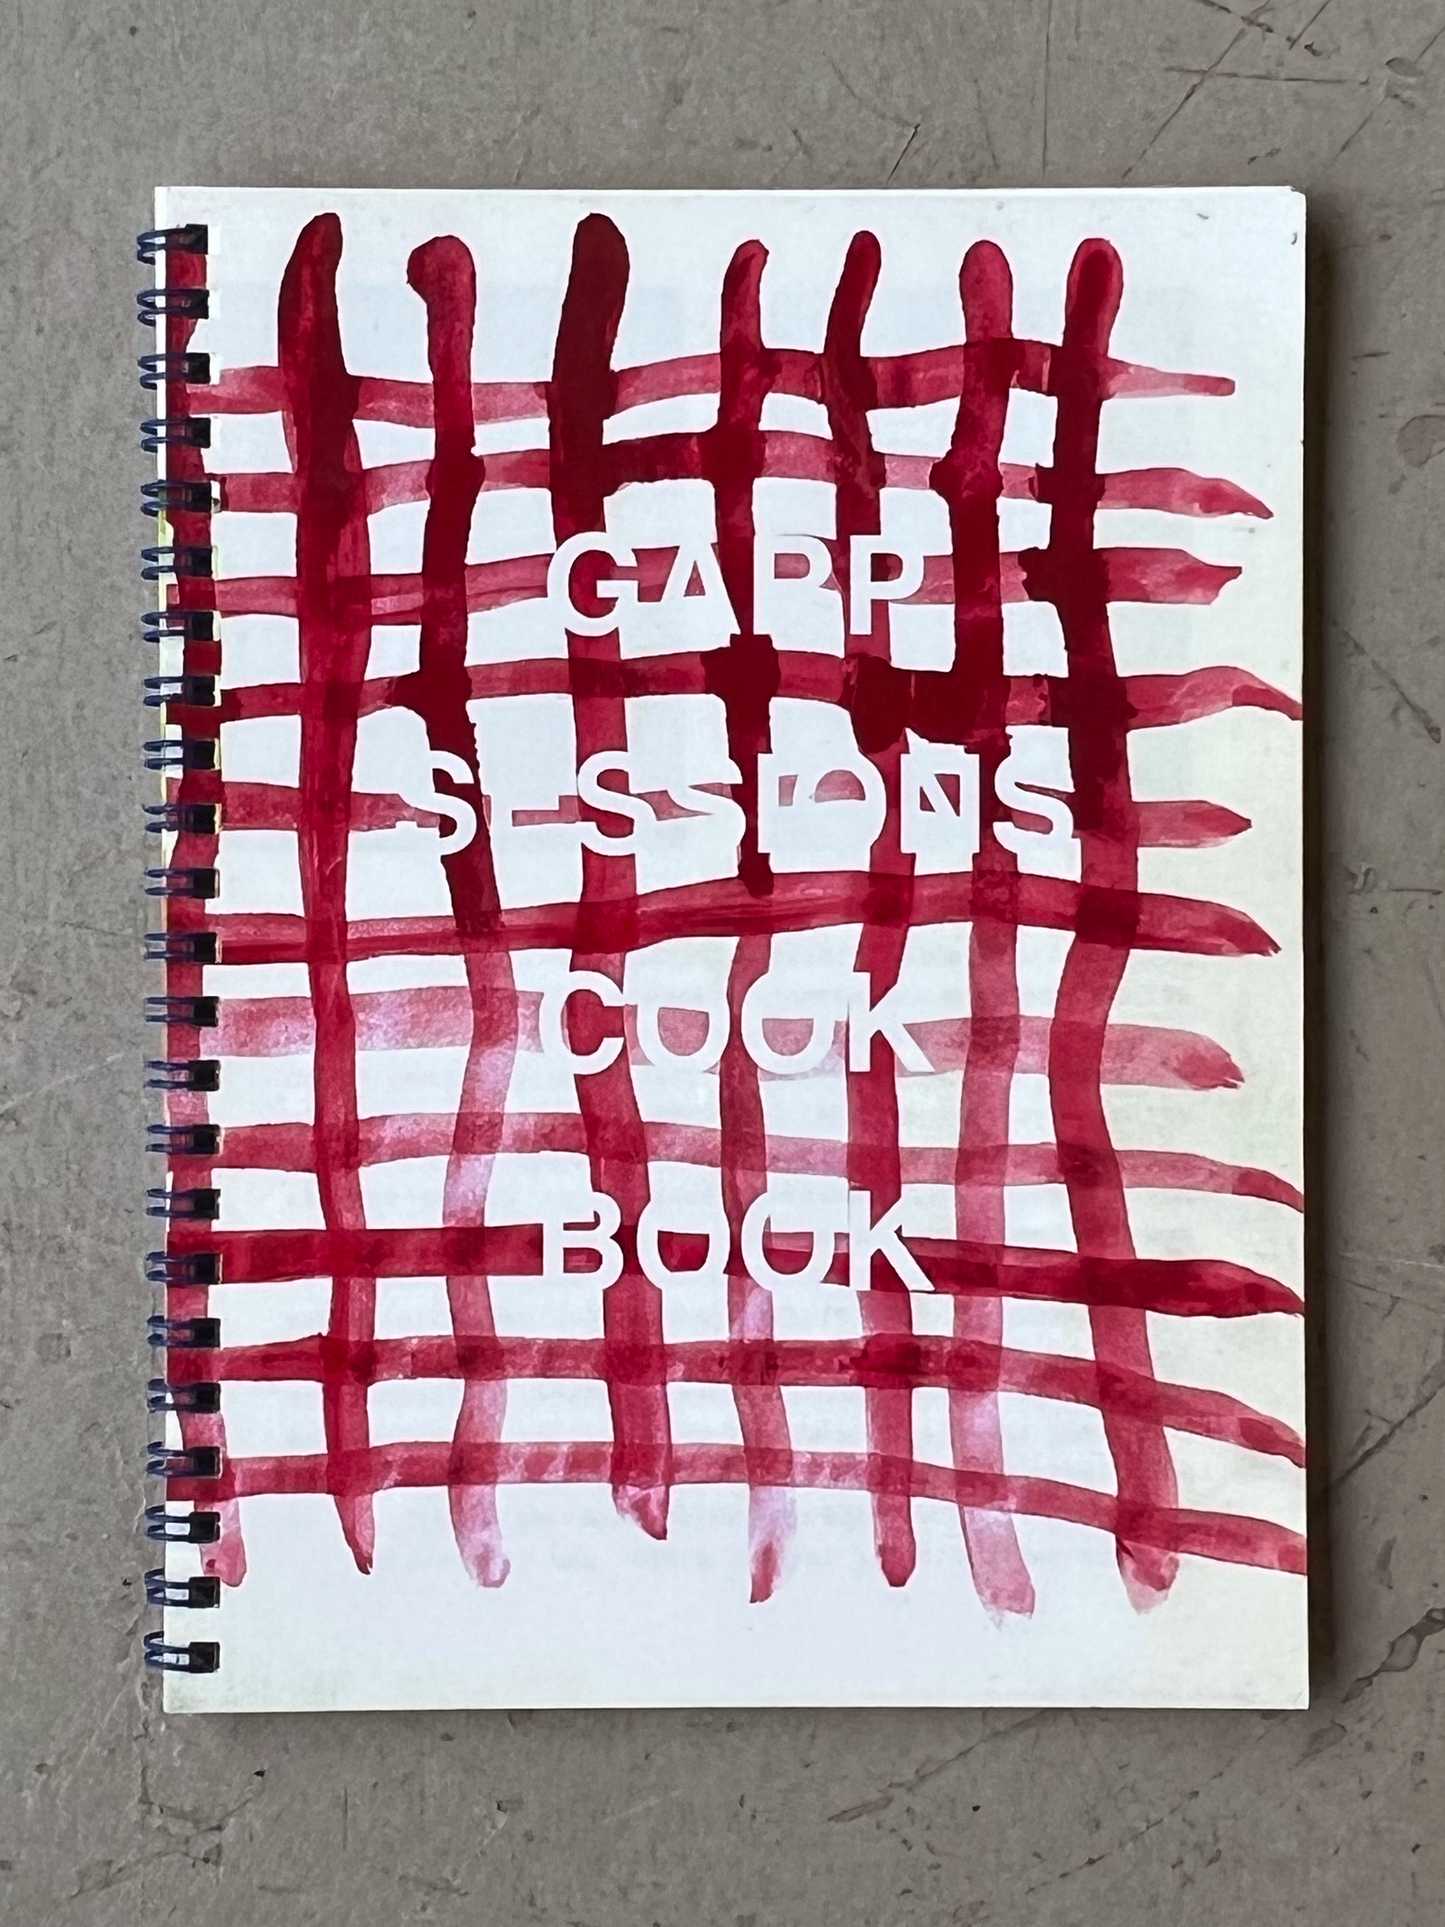 Garp Sessions Cook Book